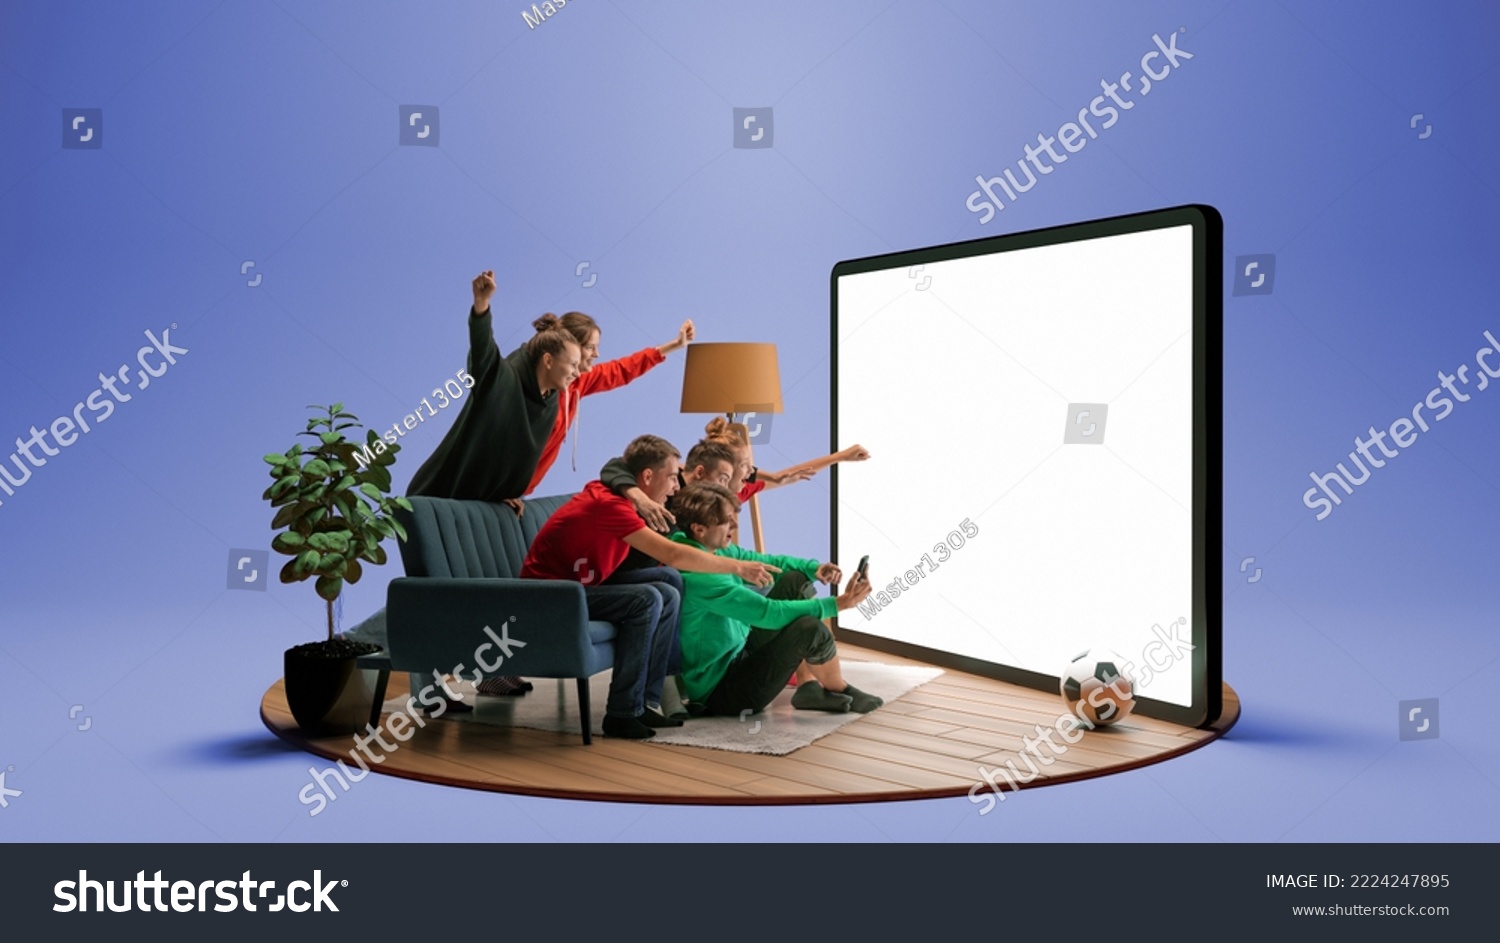 Goal. Group of young emotional friends watching football match, sport show or movie together. Excited girls and boys sitting in front of huge 3D model of device screen at home interior #2224247895